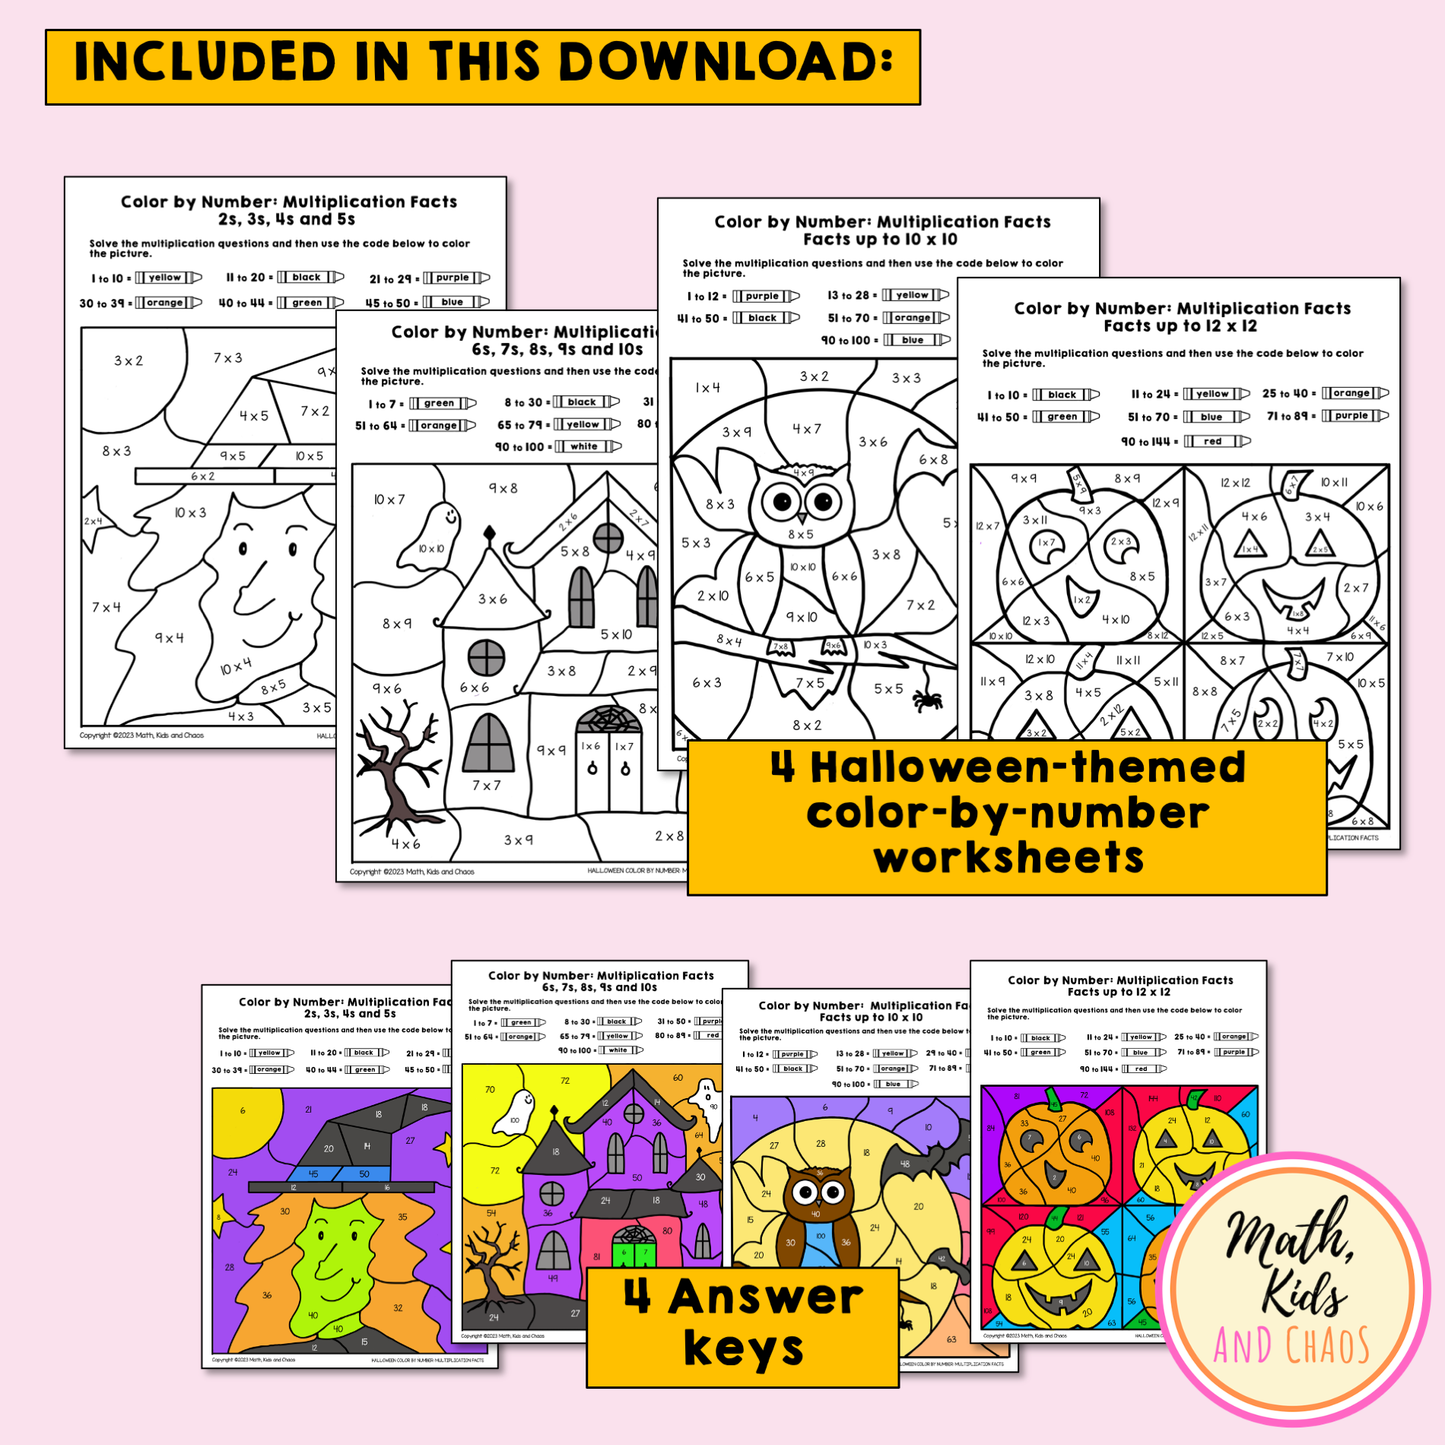 Halloween Color-by-Number Multiplication Facts Worksheets (US Spelling)